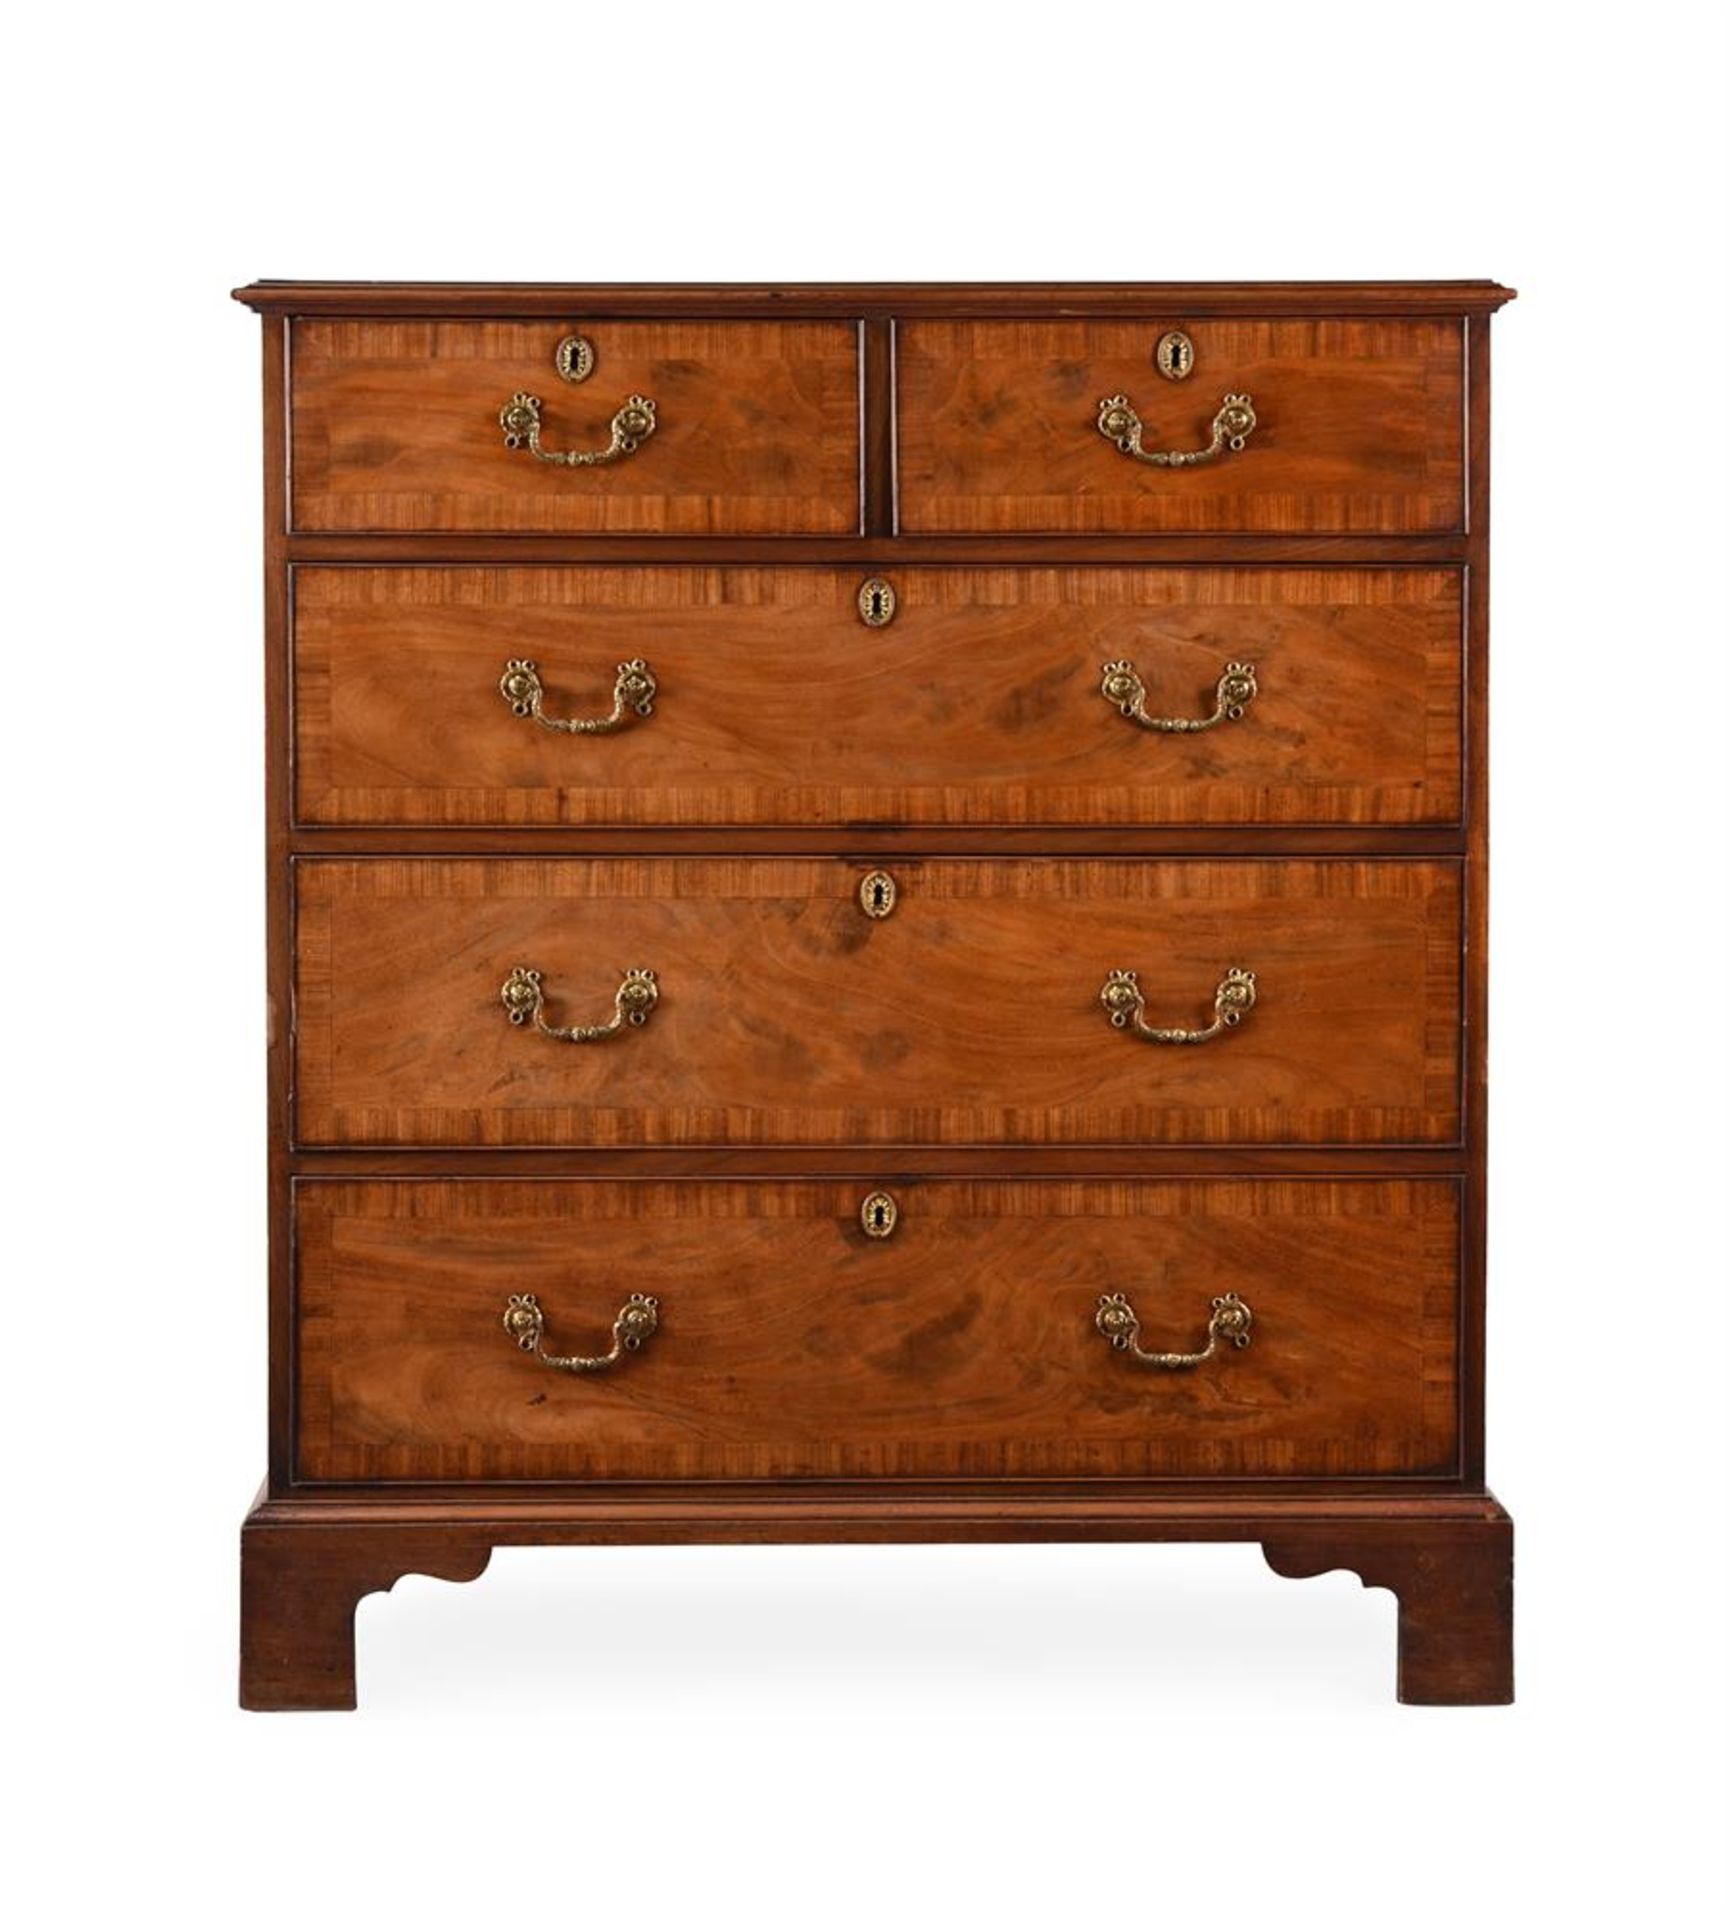 A GEORGE III MAHOGANY AND CROSSBANDED CHEST OF DRAWERS IN THE MANNER OF THOMAS CHIPPENDALE